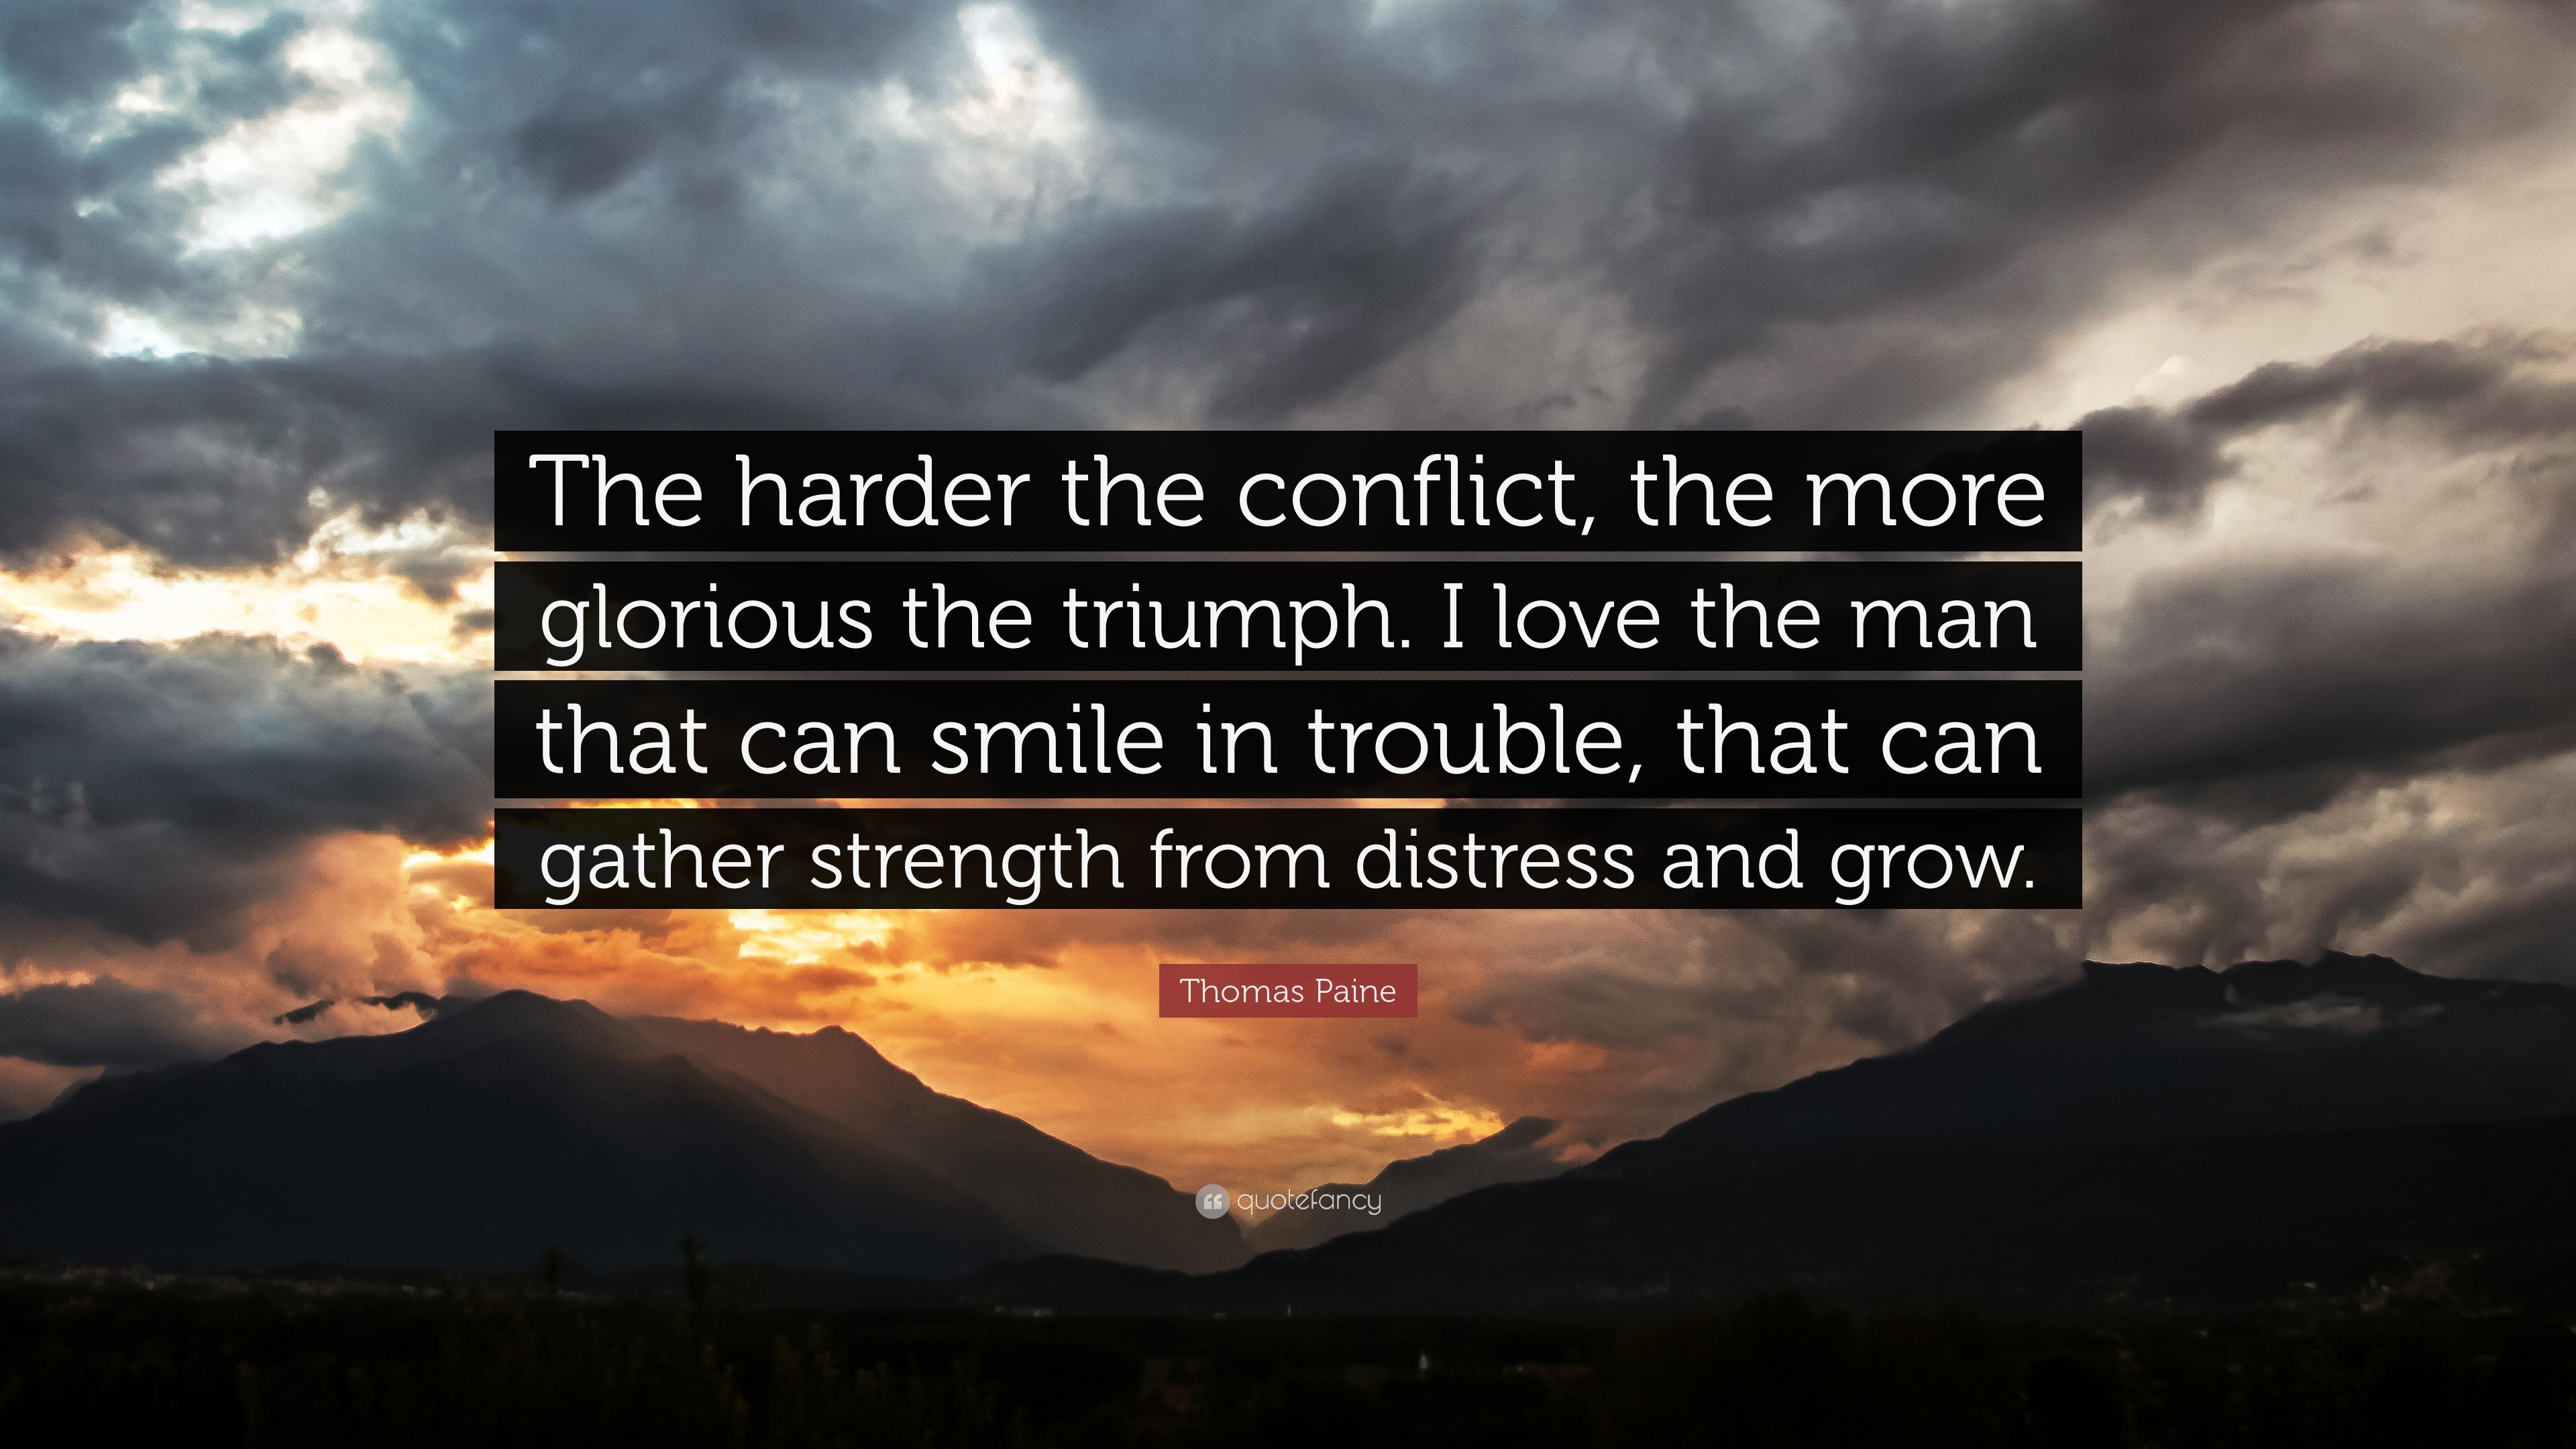 the harder the conflict the greater the triumph quote